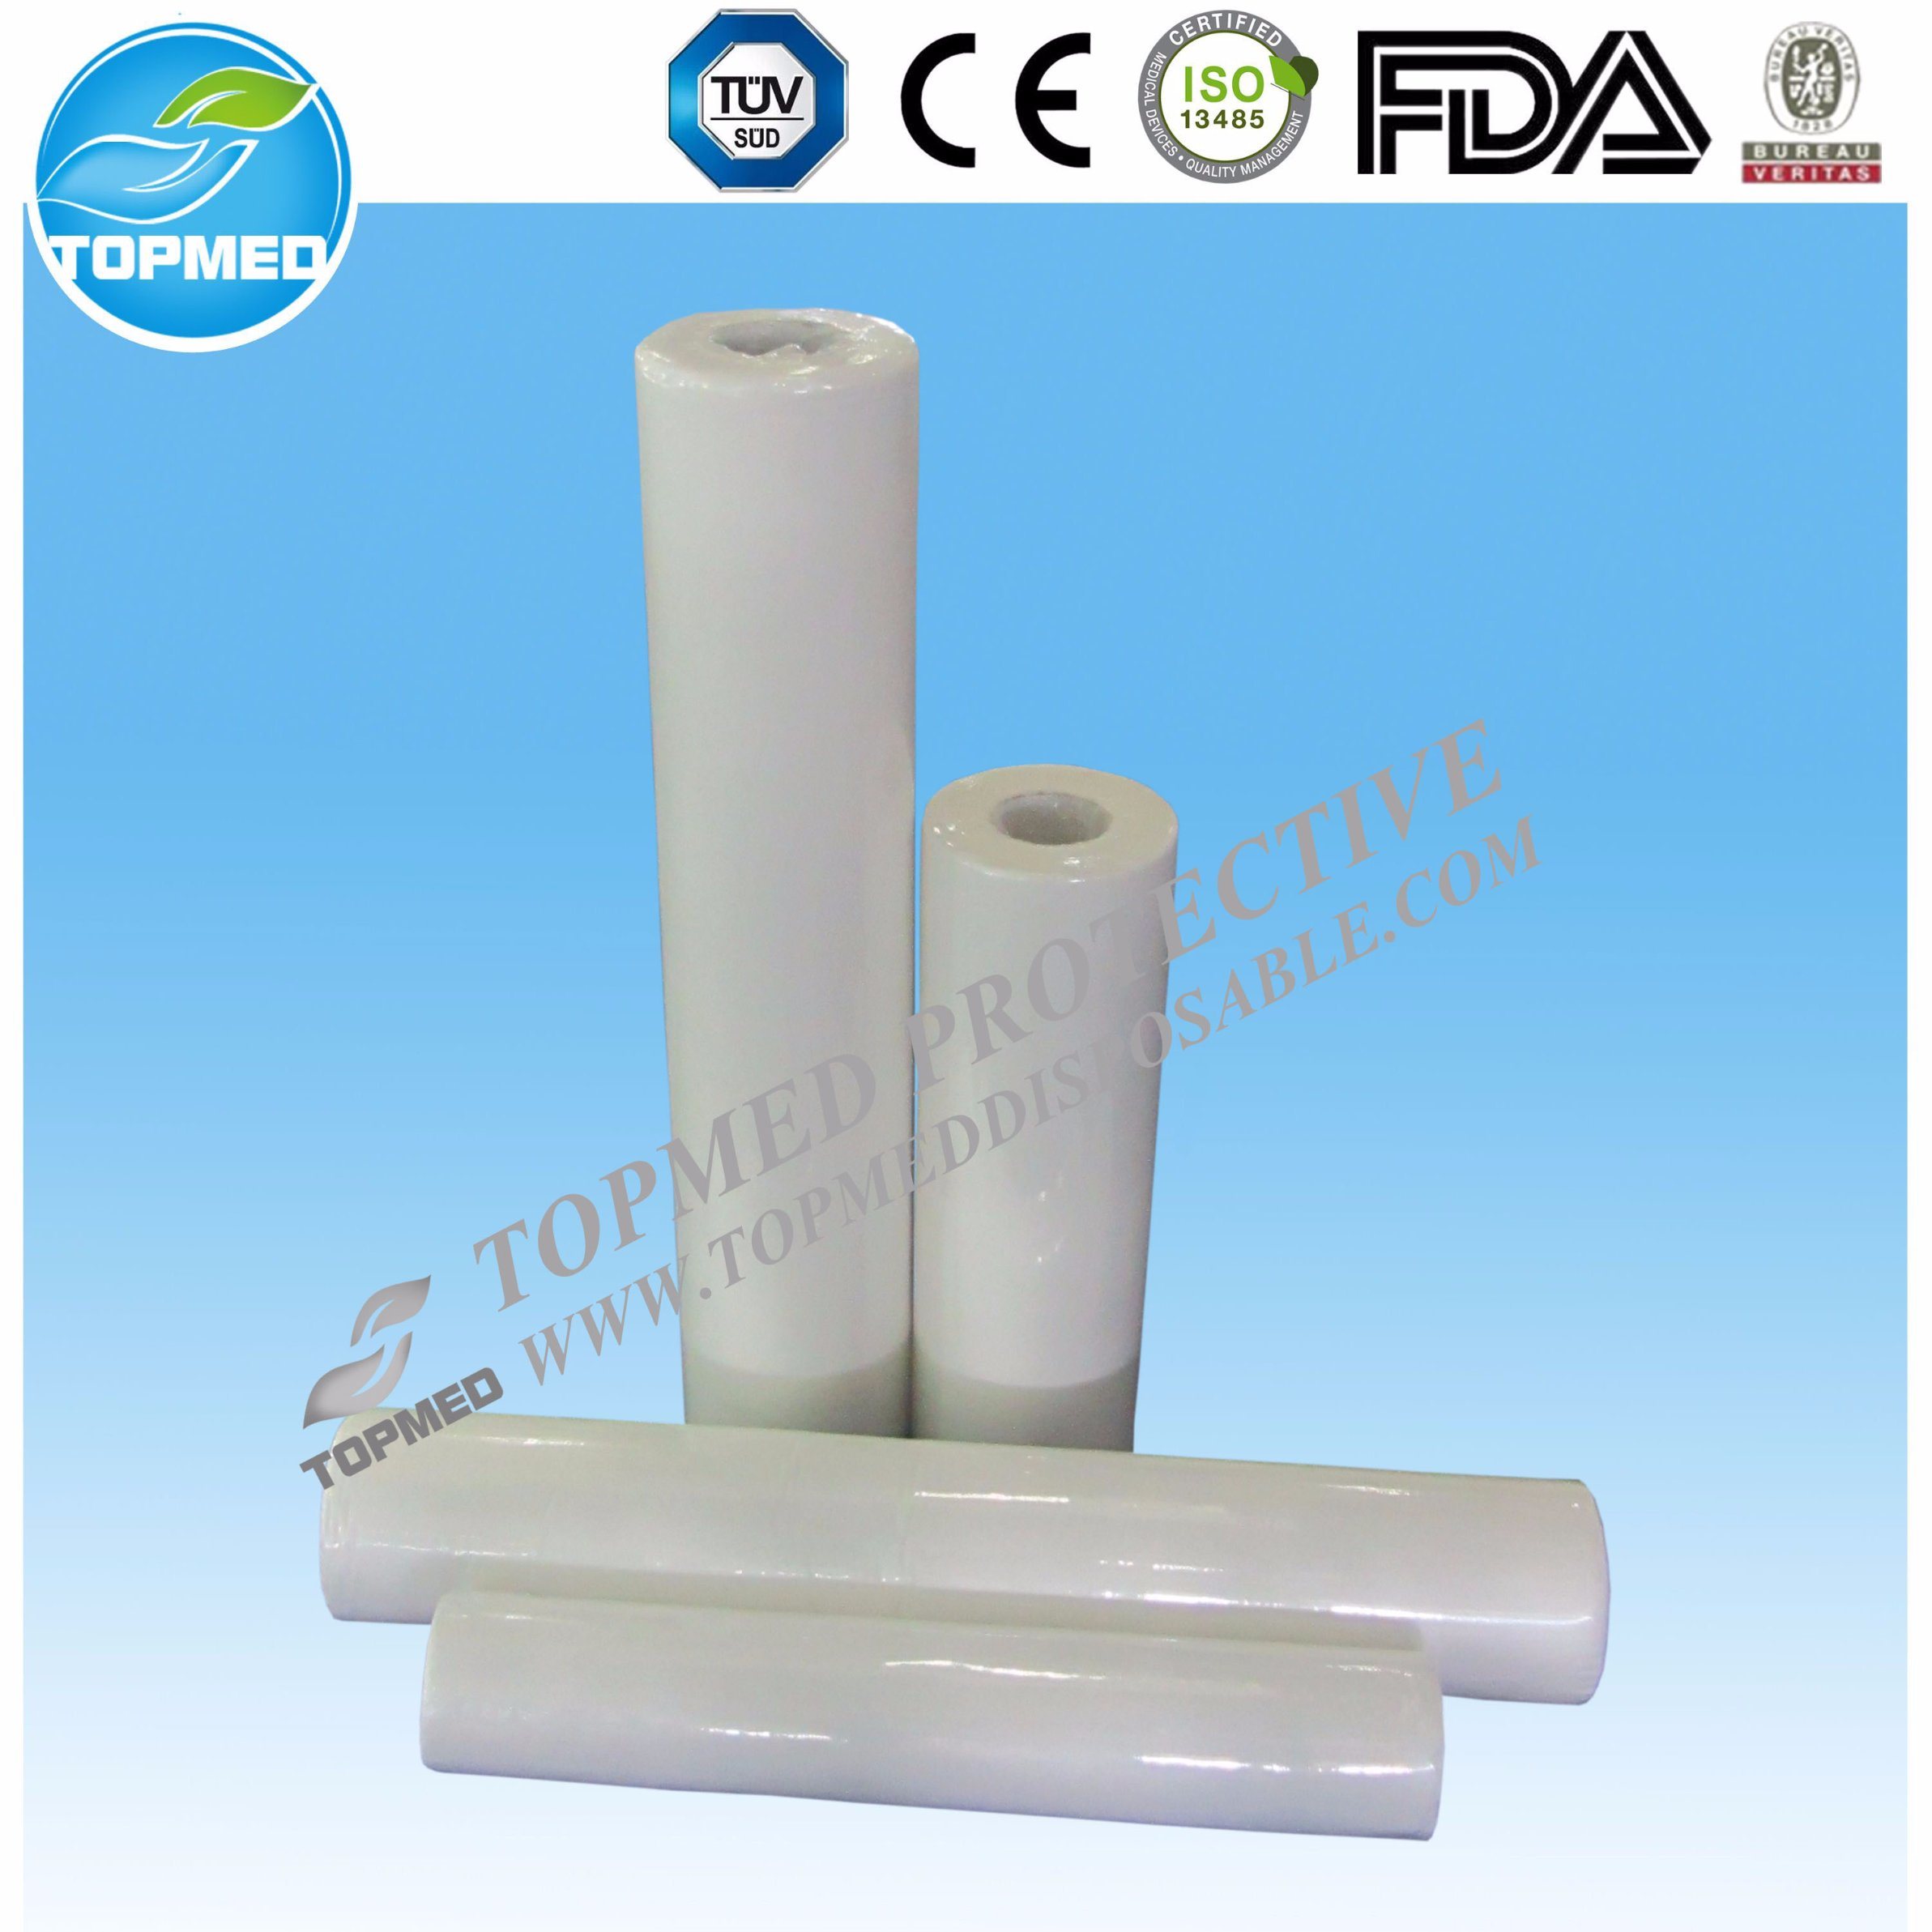 Bed Sheet Cover Nonwoven Couch Bed Roll, Medical Paper Rolls